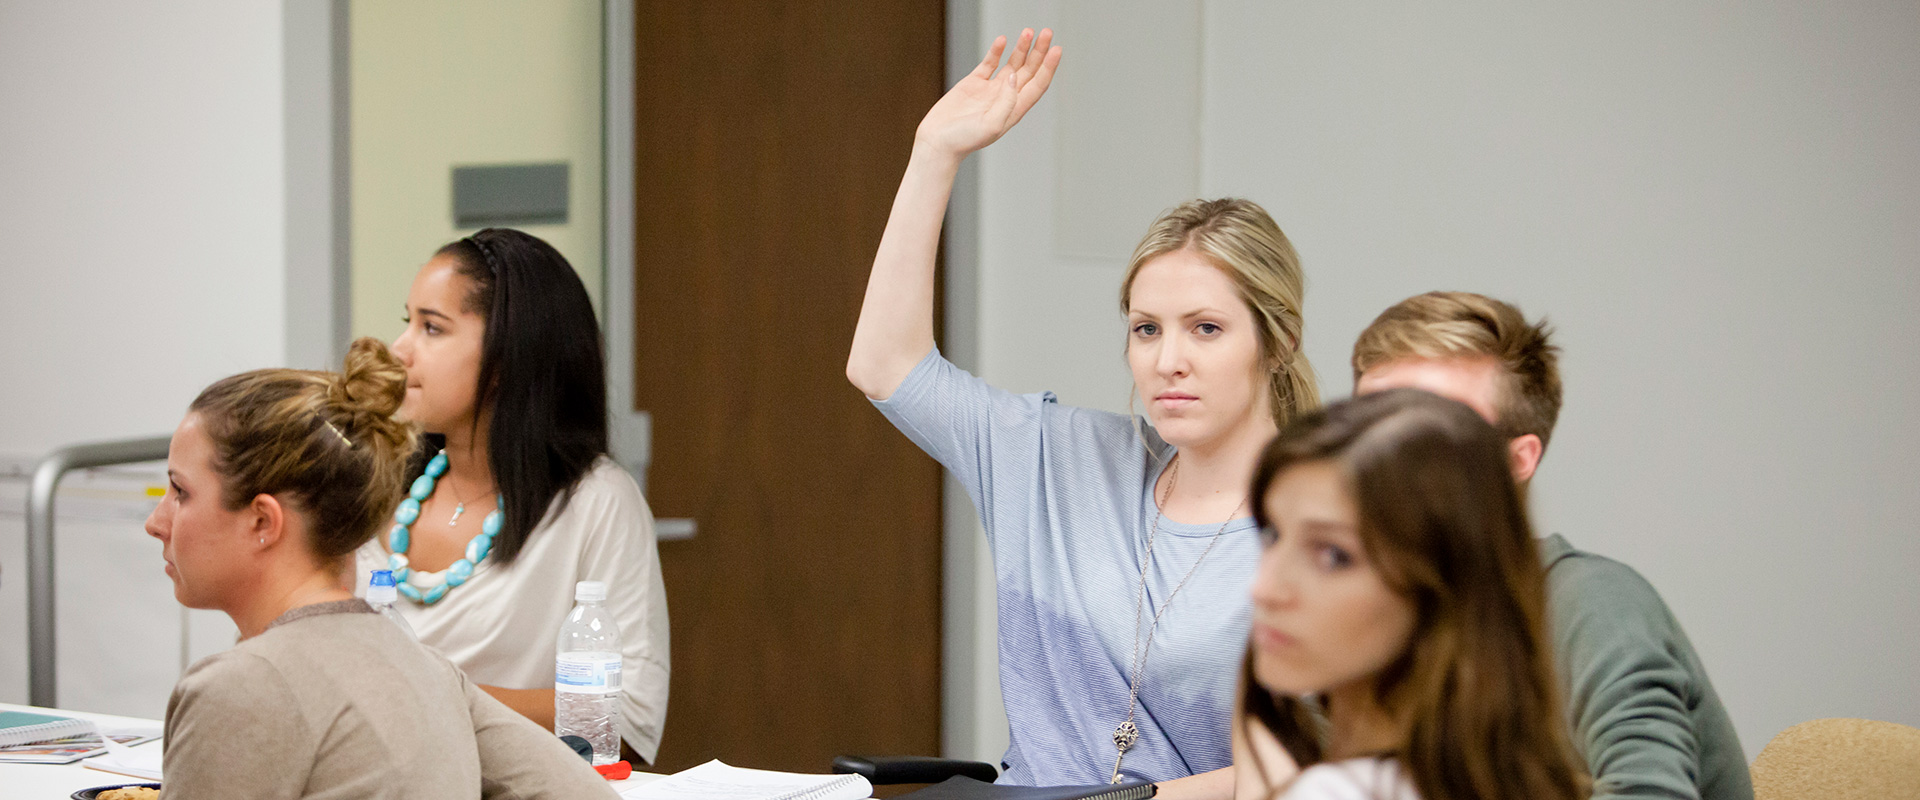 A student raising her hand in class